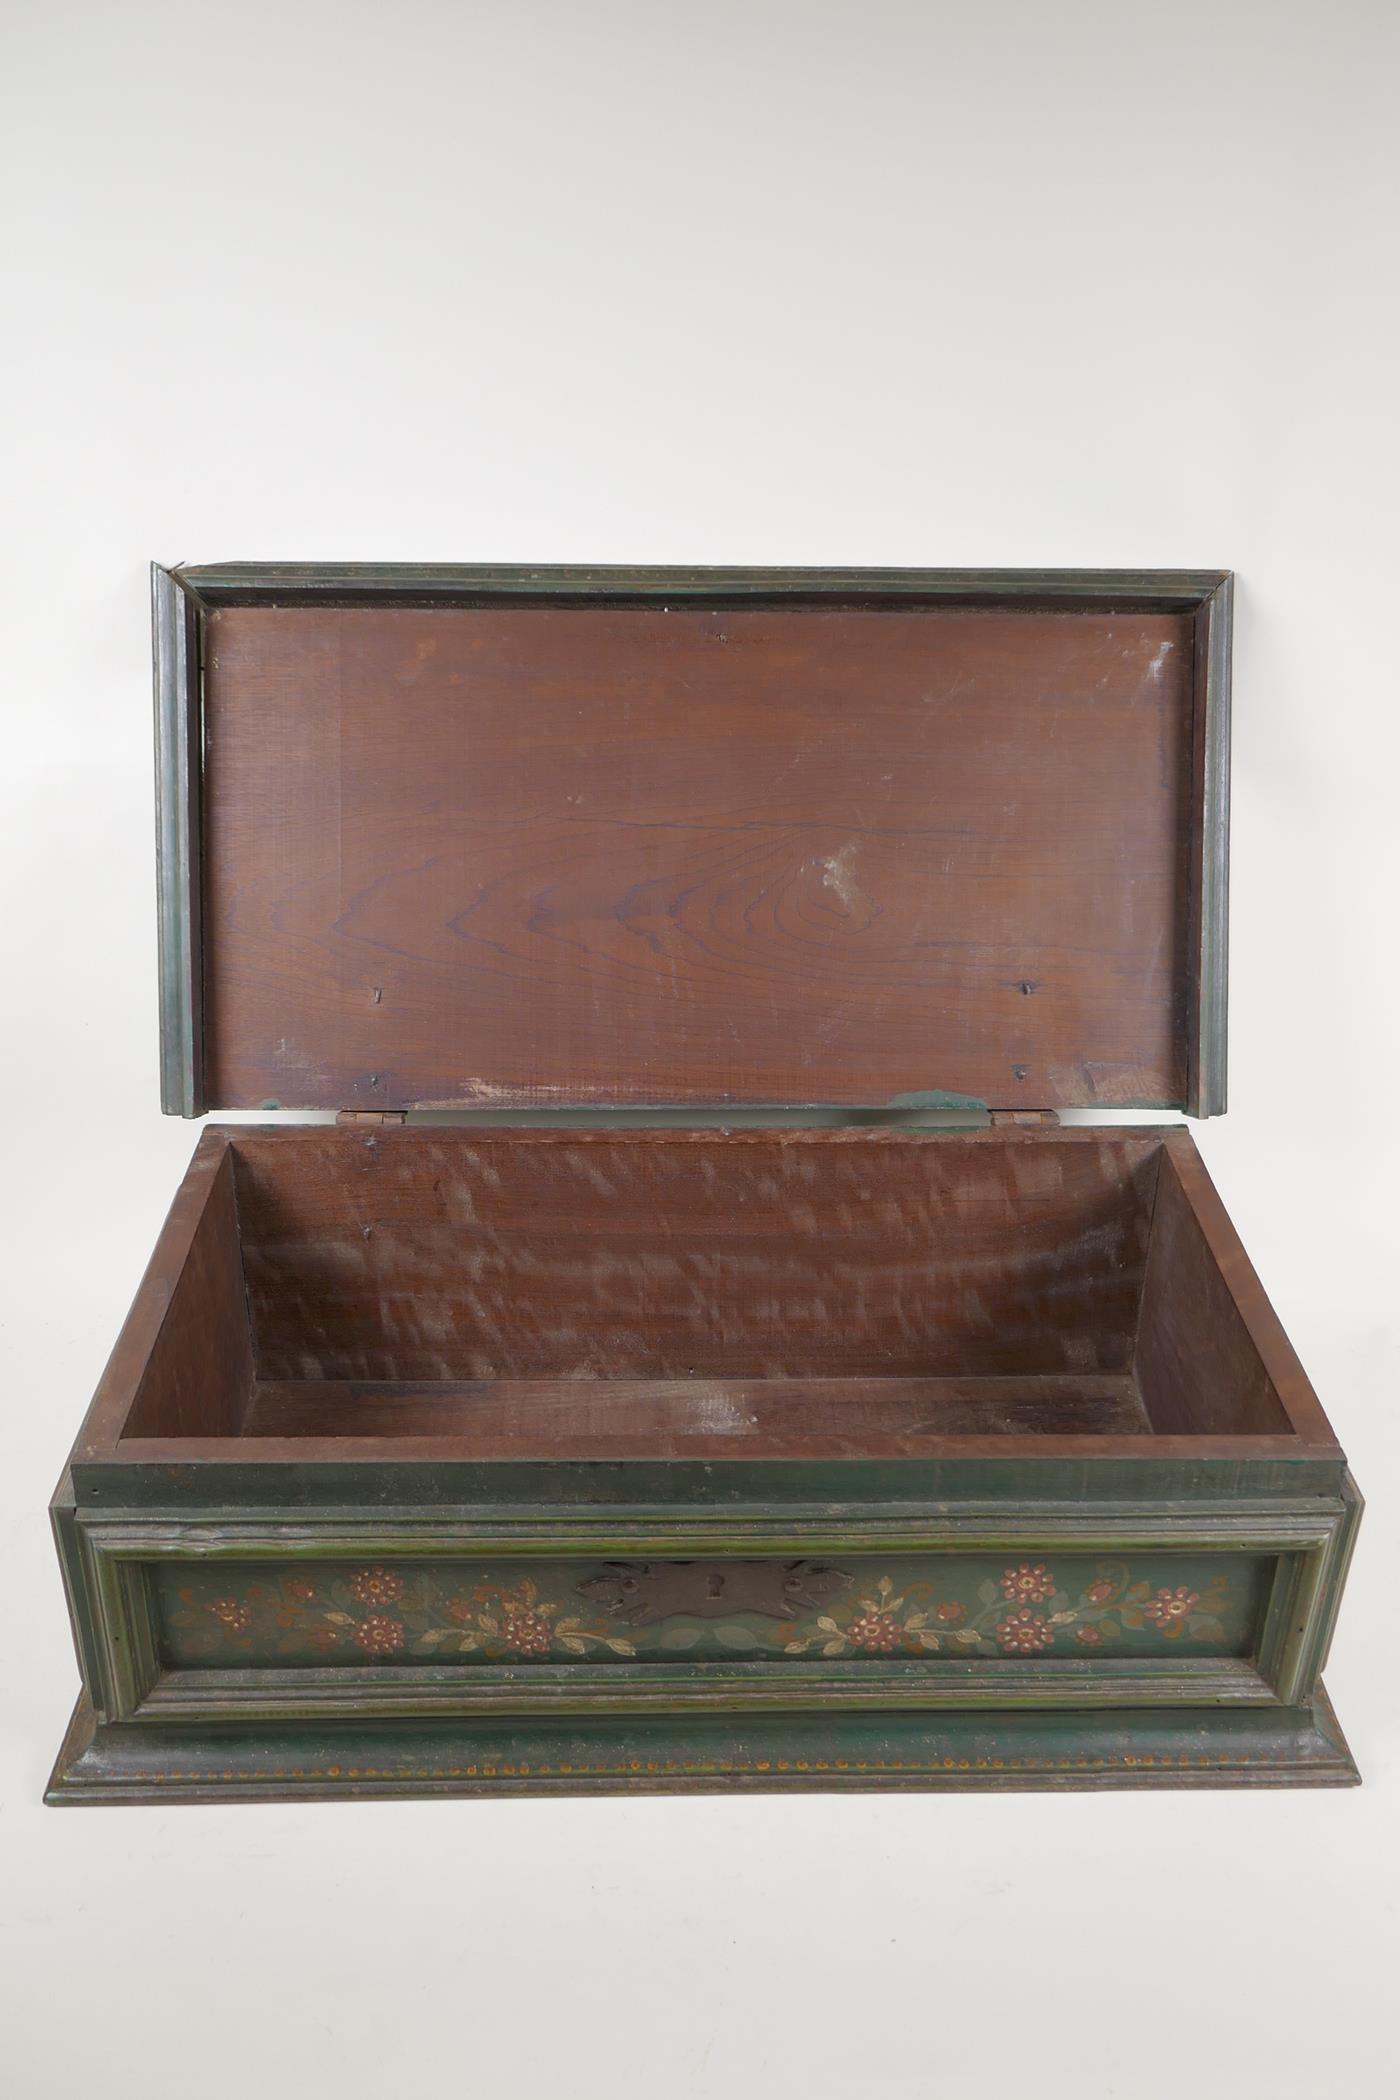 A C19th continental painted hardwood chest, 22" x 11", 7" high - Image 4 of 4